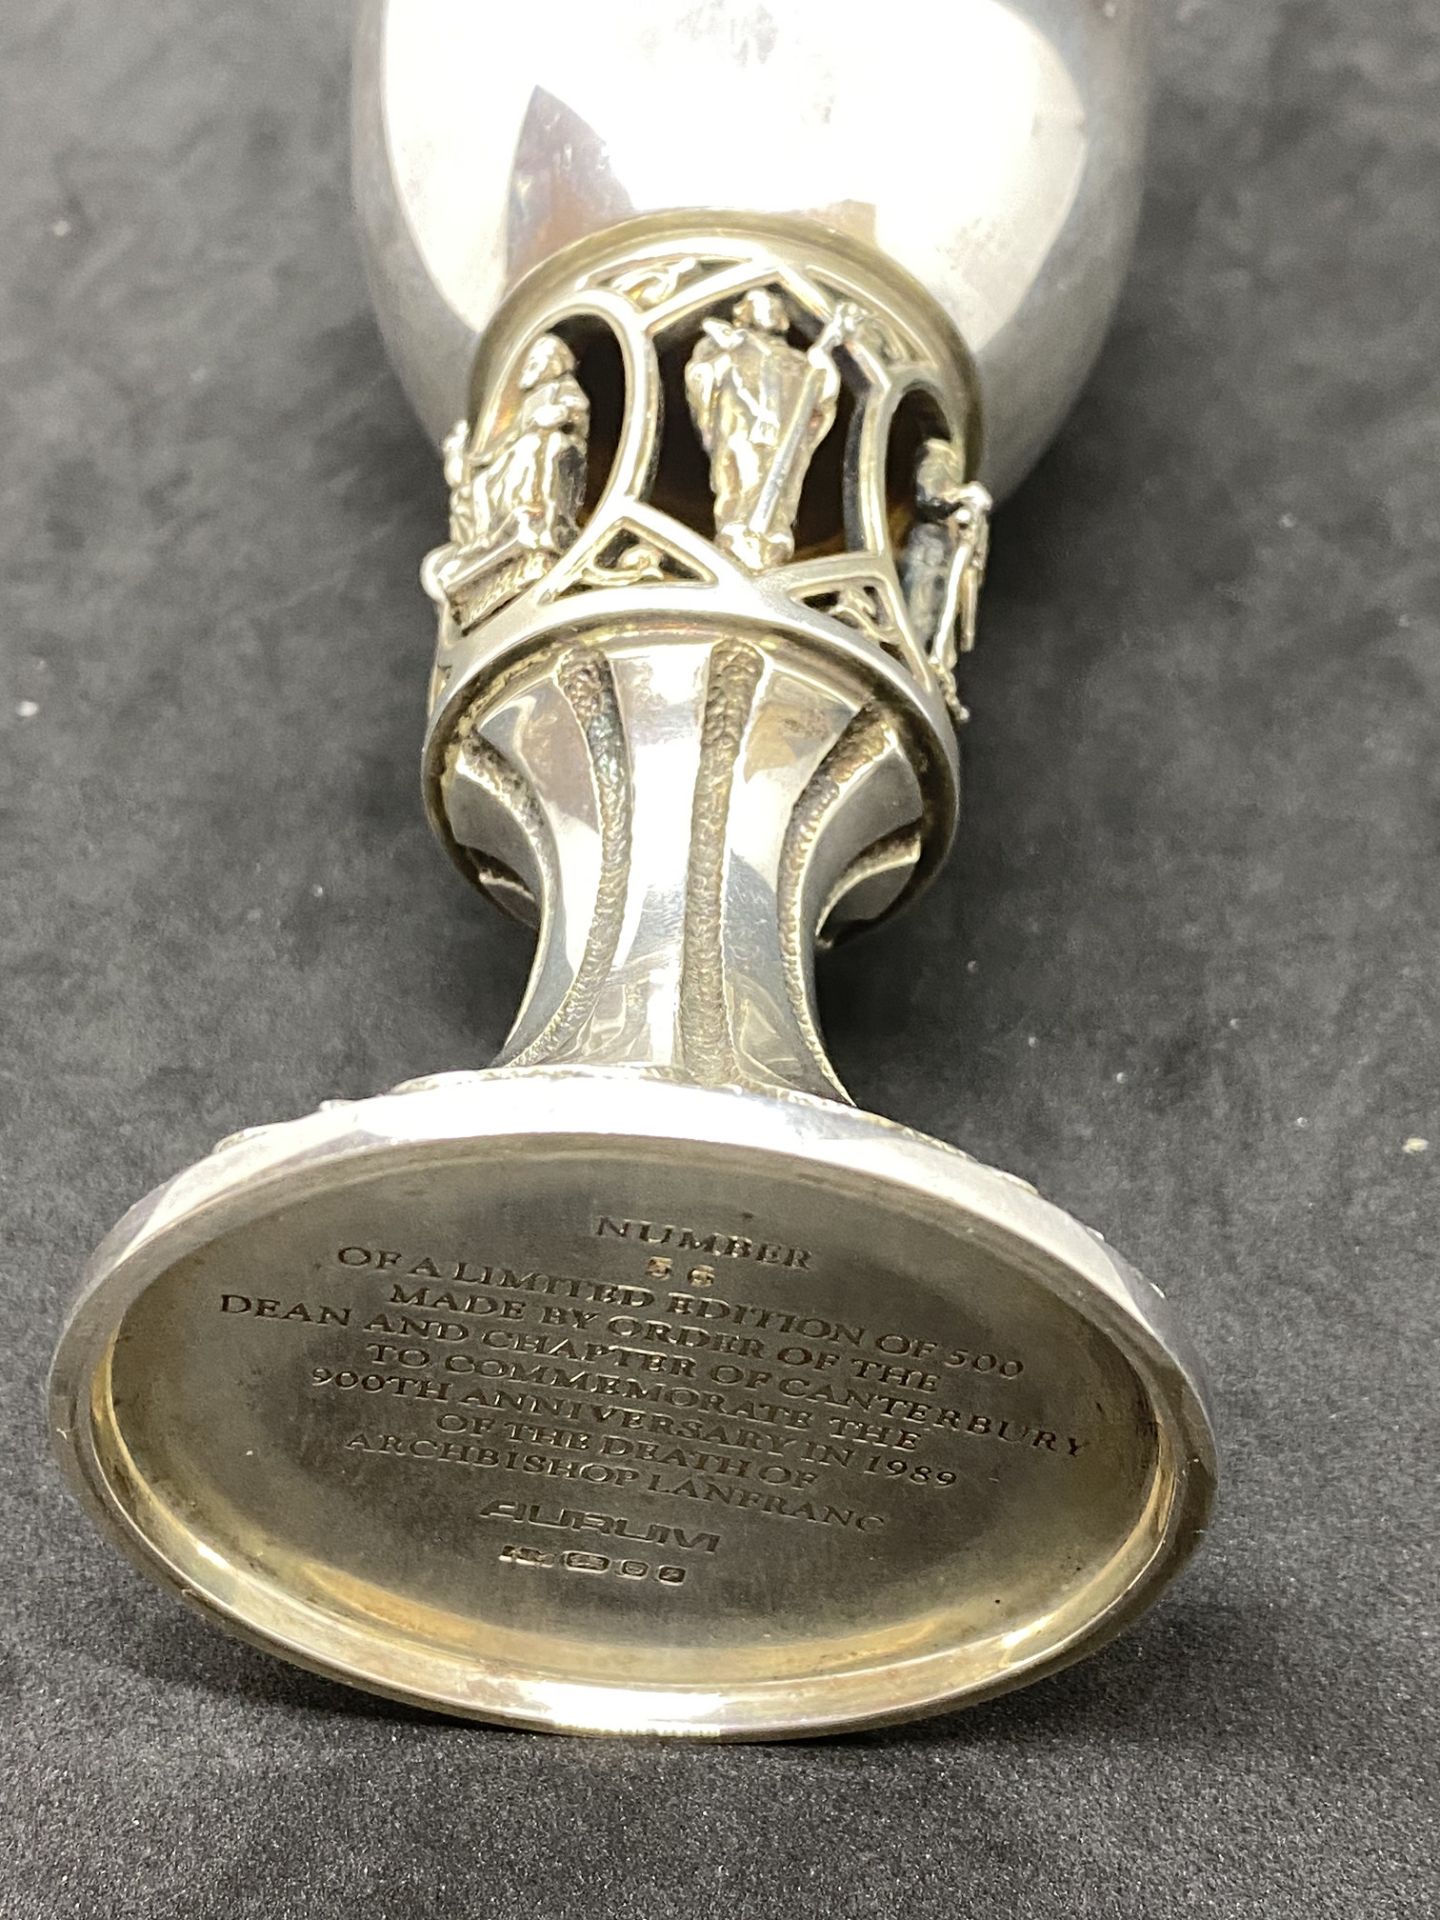 333gram LTD EDITION GOBLET NUMBER 56 OF 500 - ORDER OF DEAN & CHAPTER OF CANTERBURY - Image 4 of 5